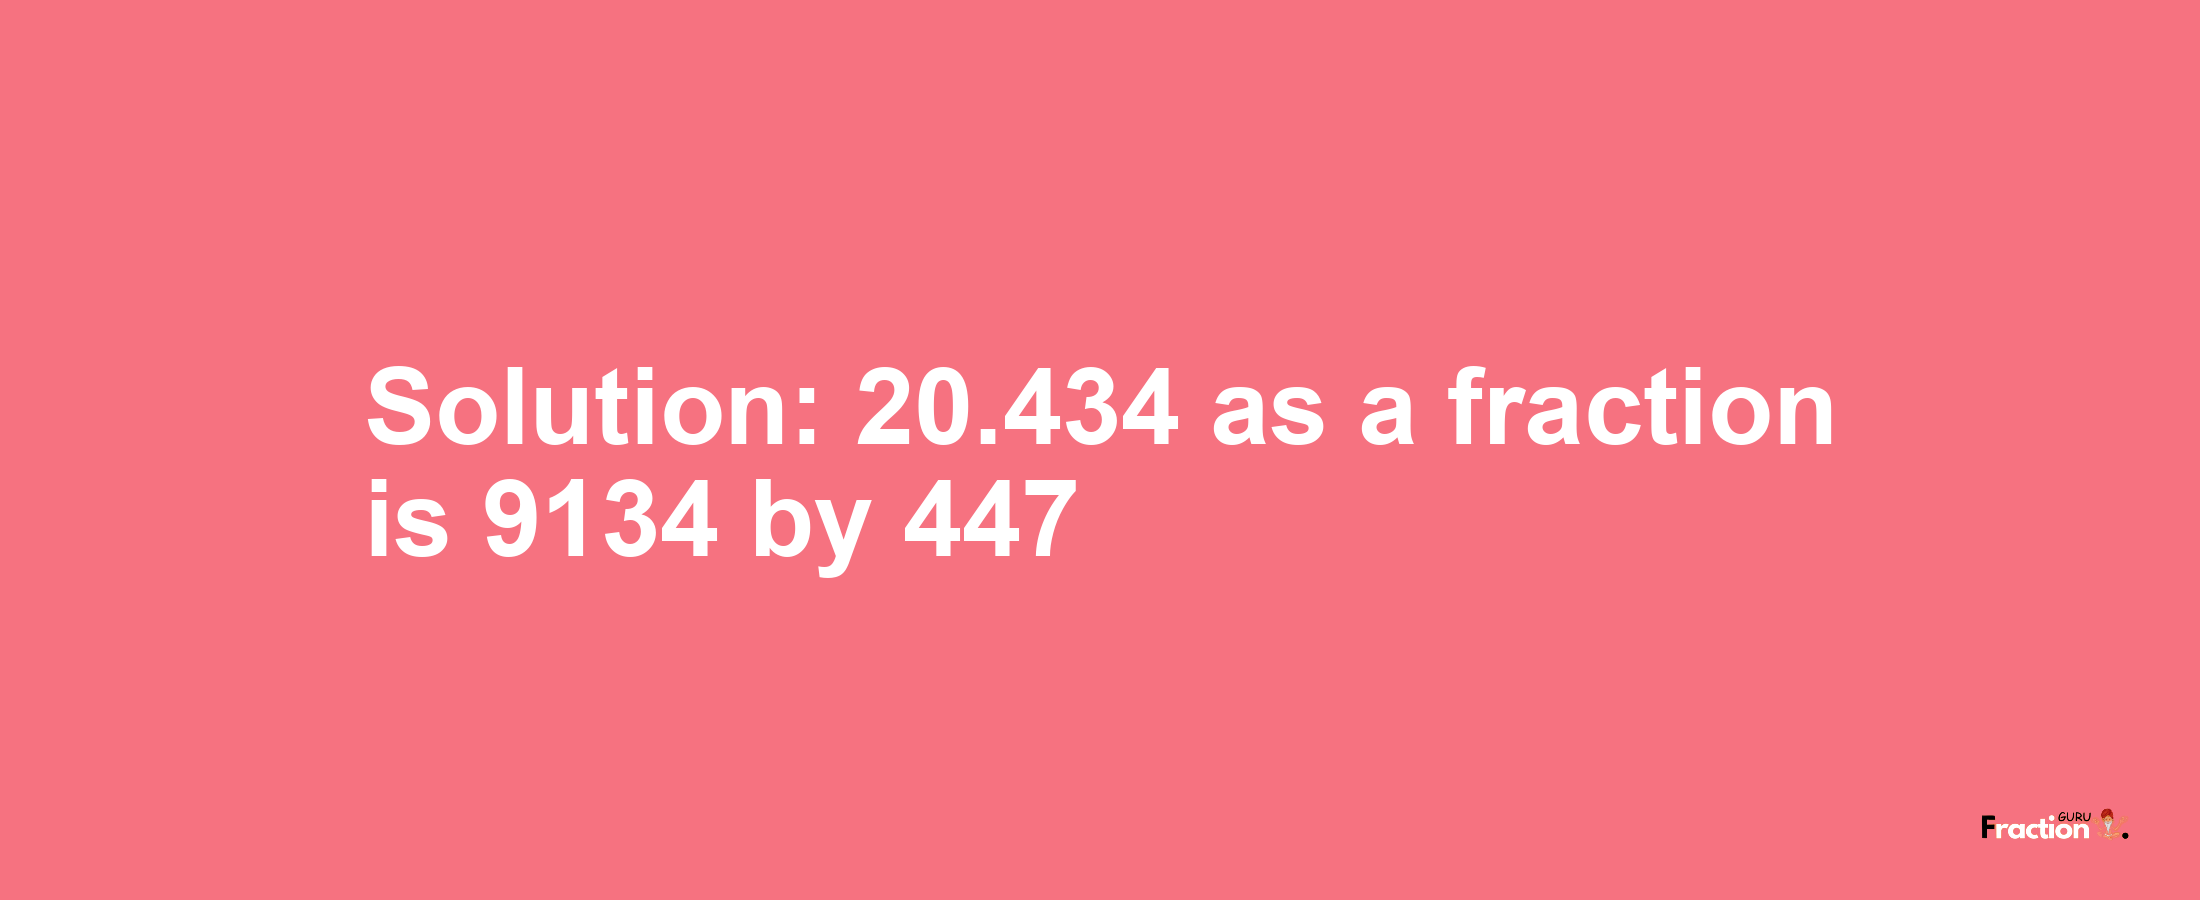 Solution:20.434 as a fraction is 9134/447